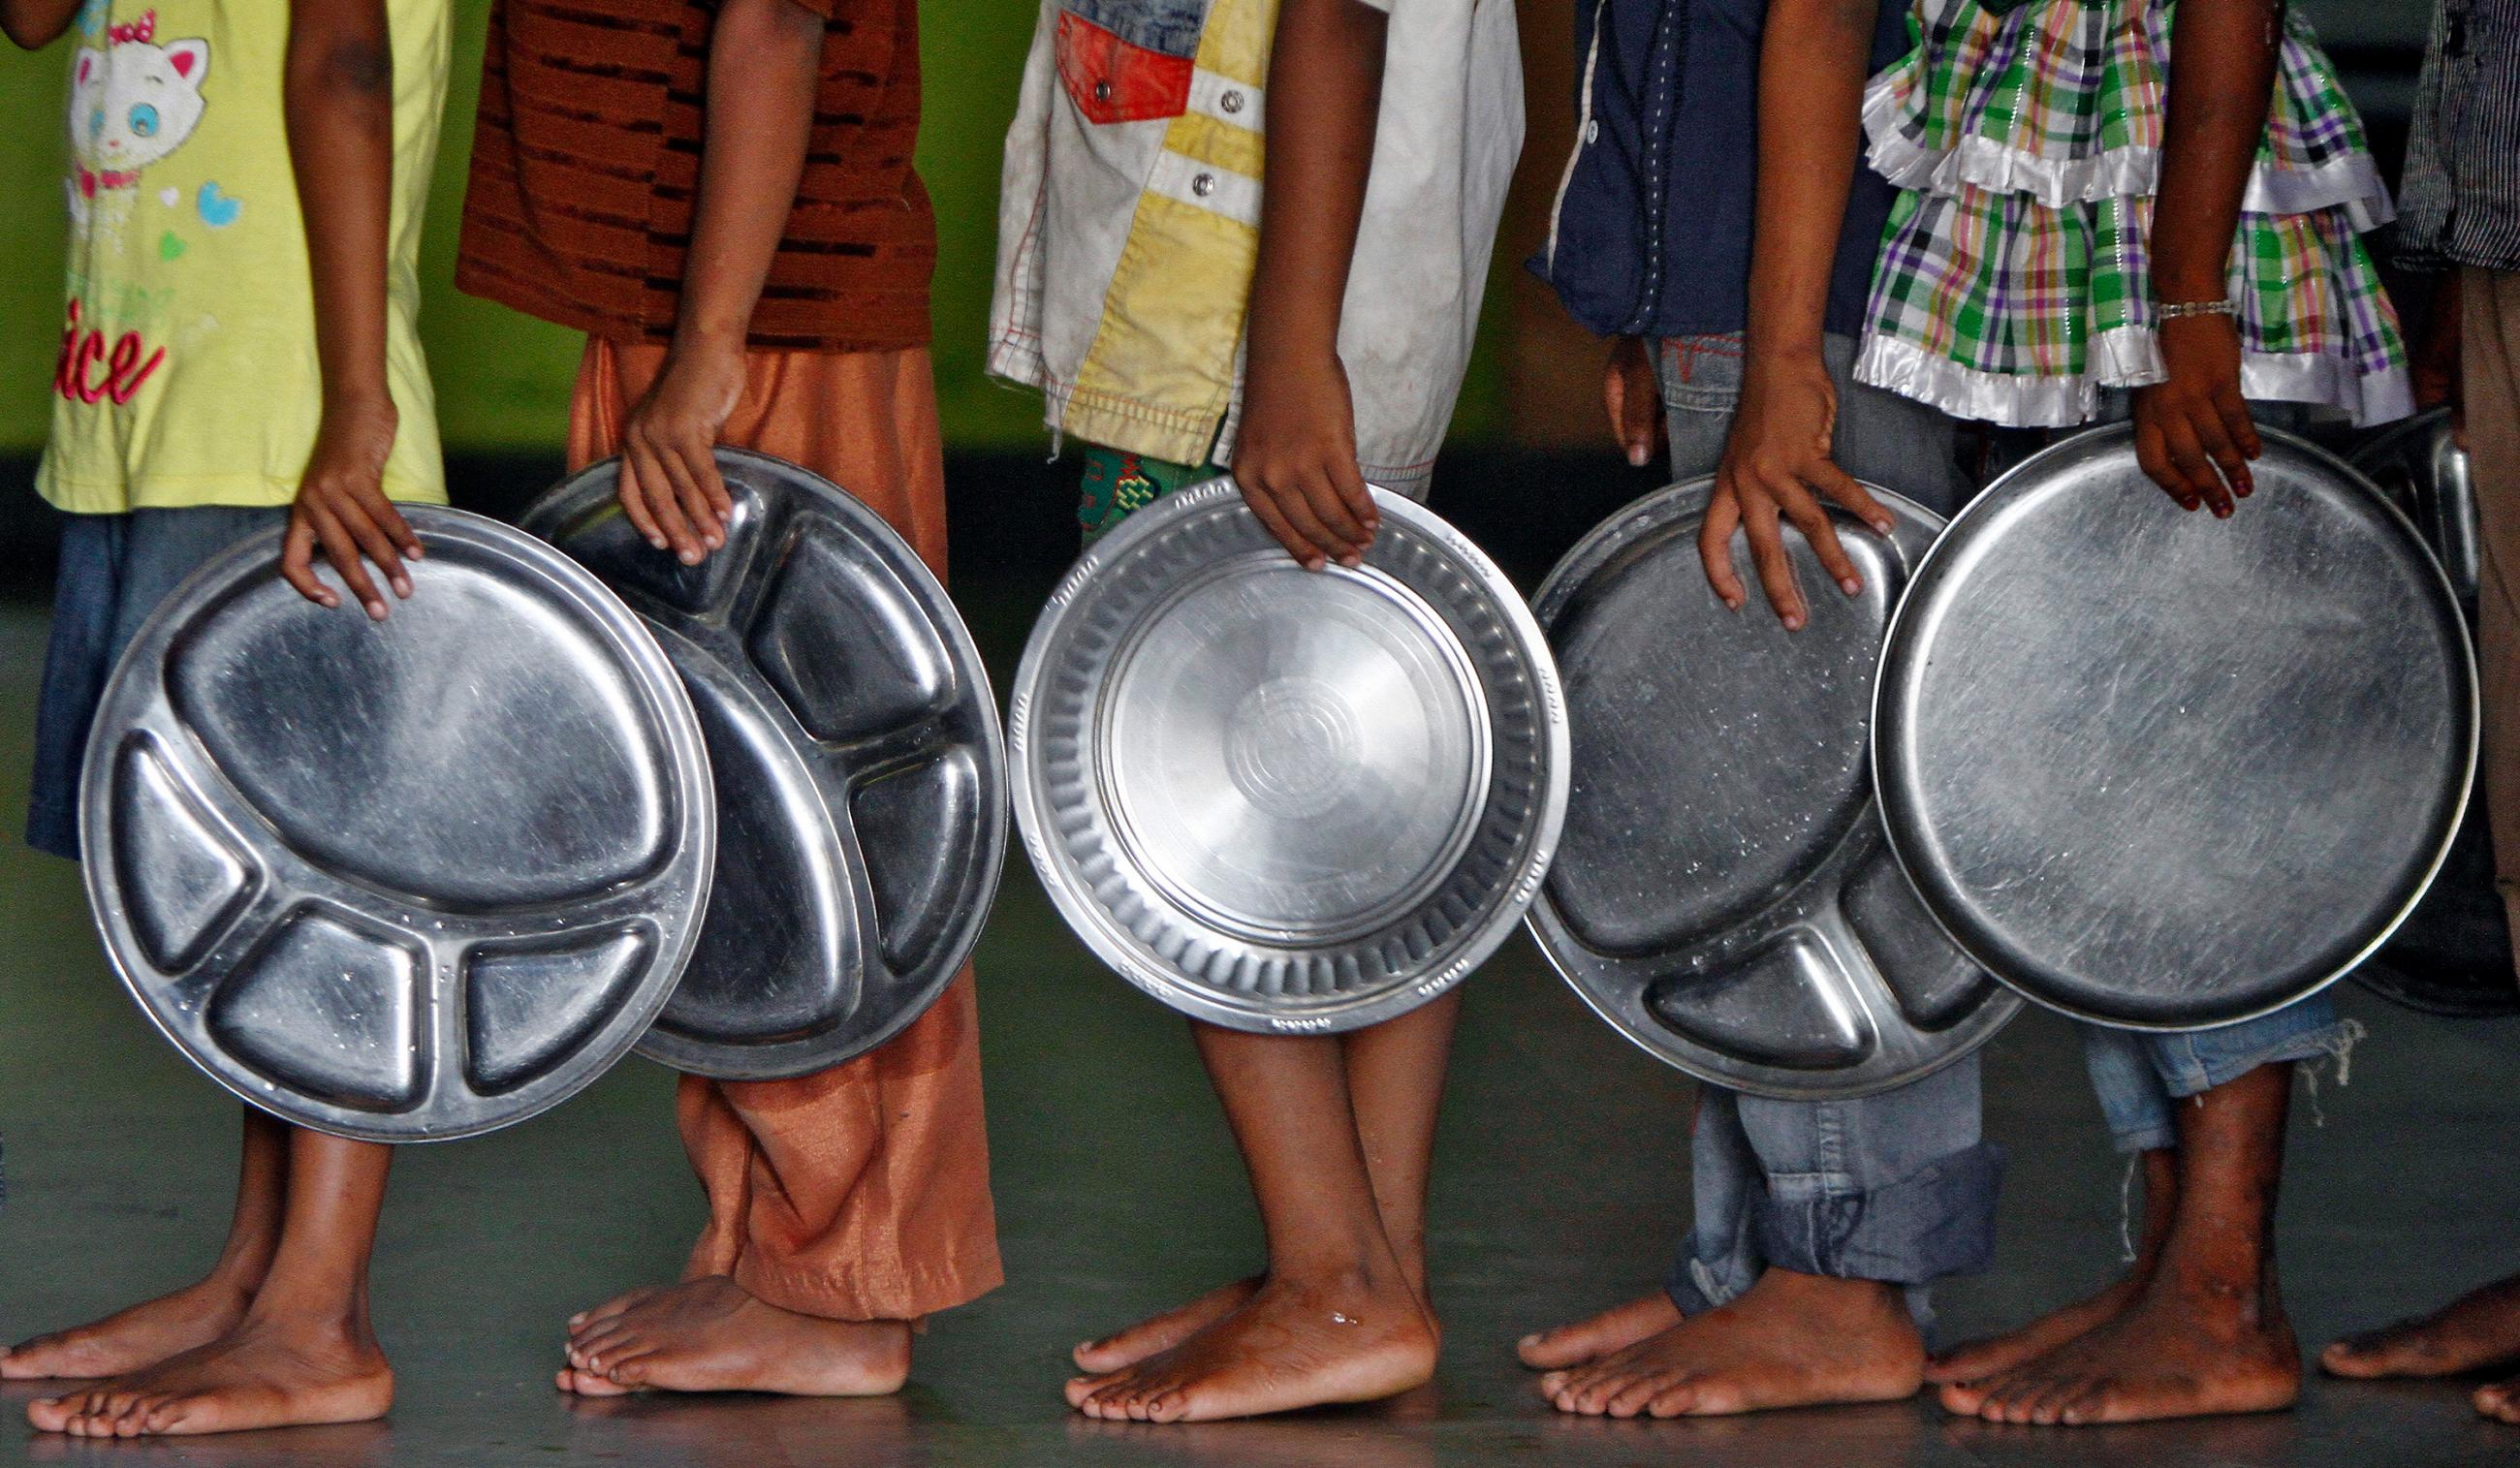 The photo shows a long line of people holding large metal platters. 